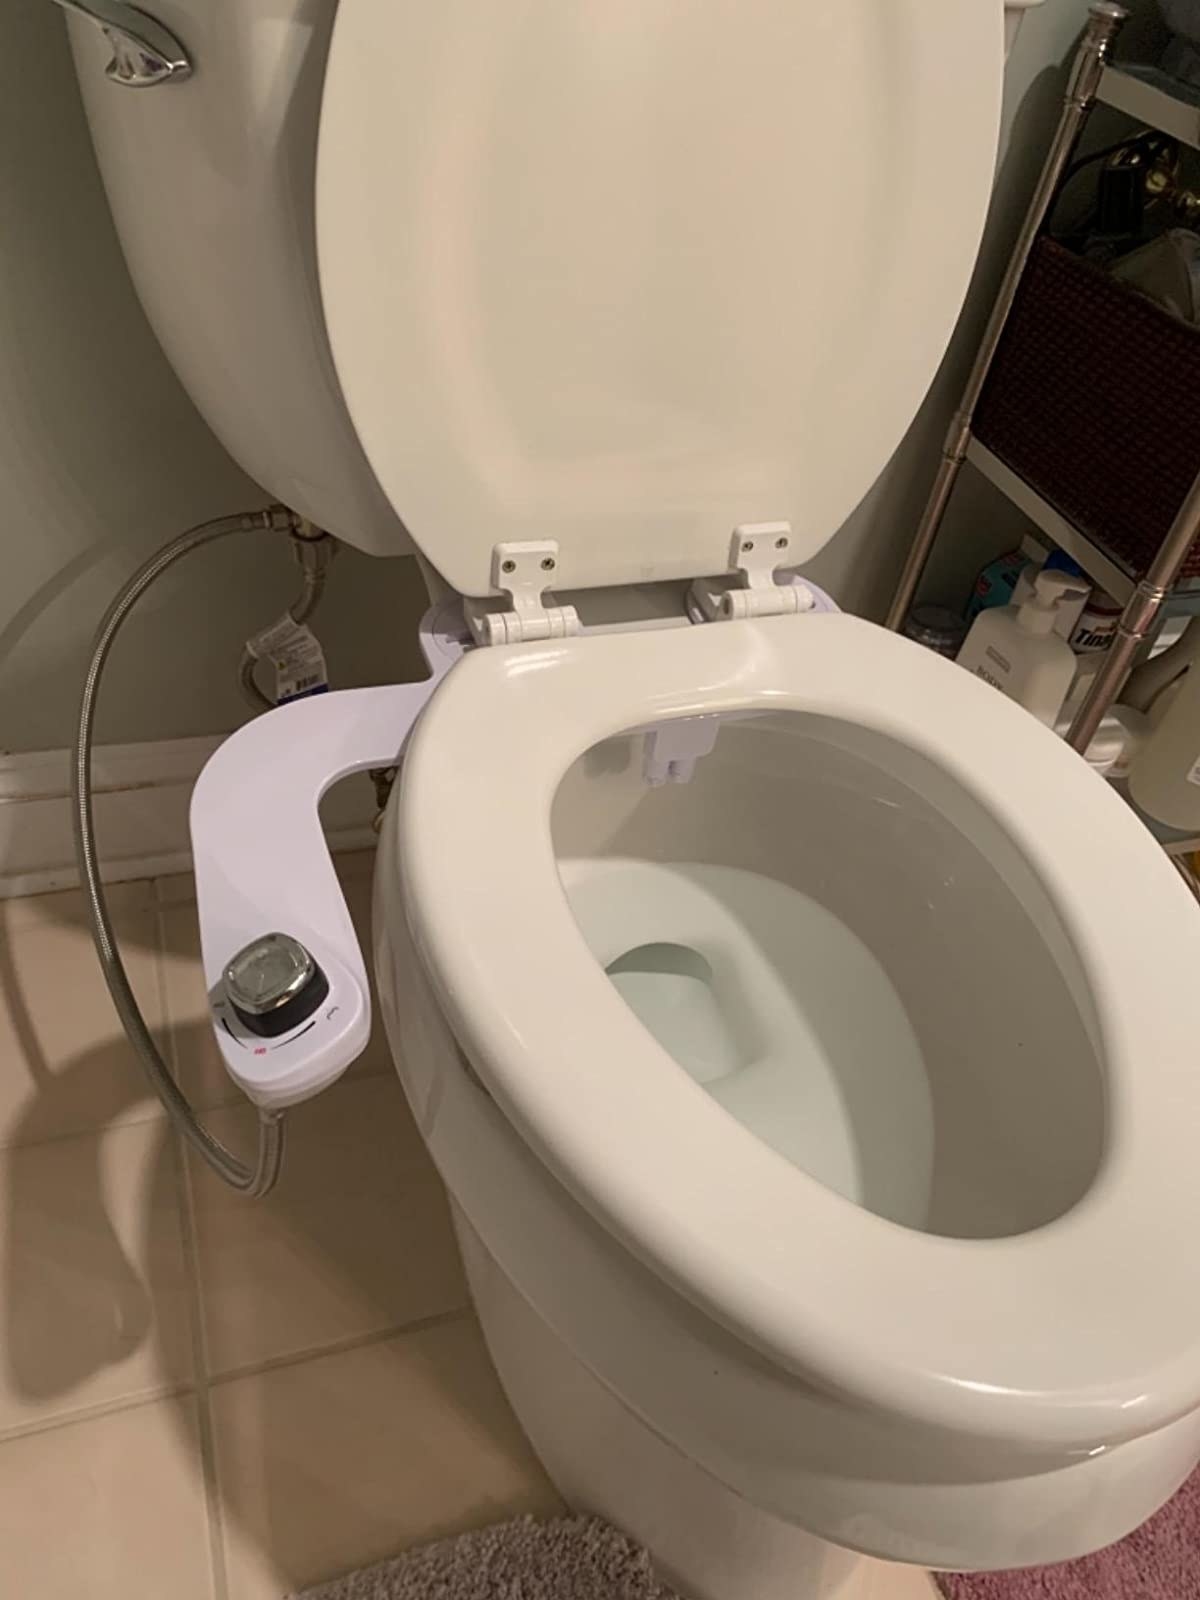 Reviewer photo of the bidet installed on their toilet